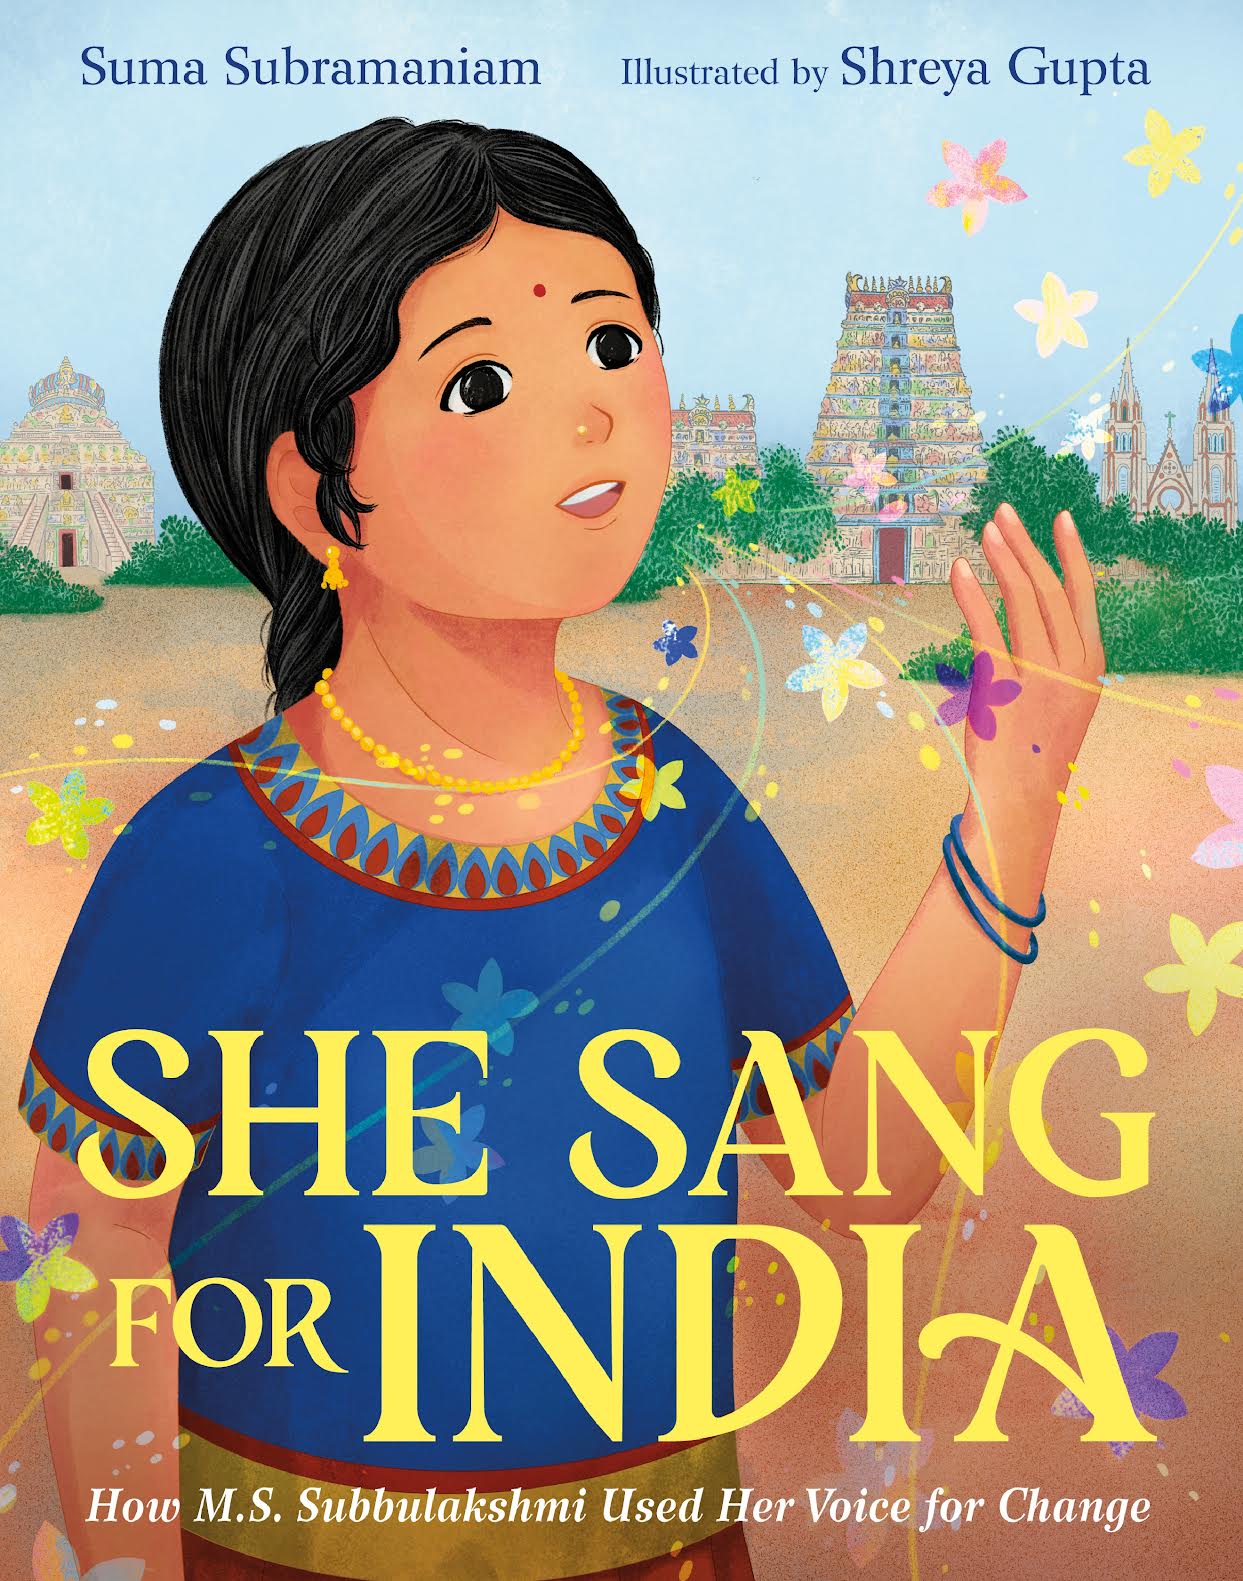 Heralding the Heralds: A She Sang for India Interview with Suma Subramaniam